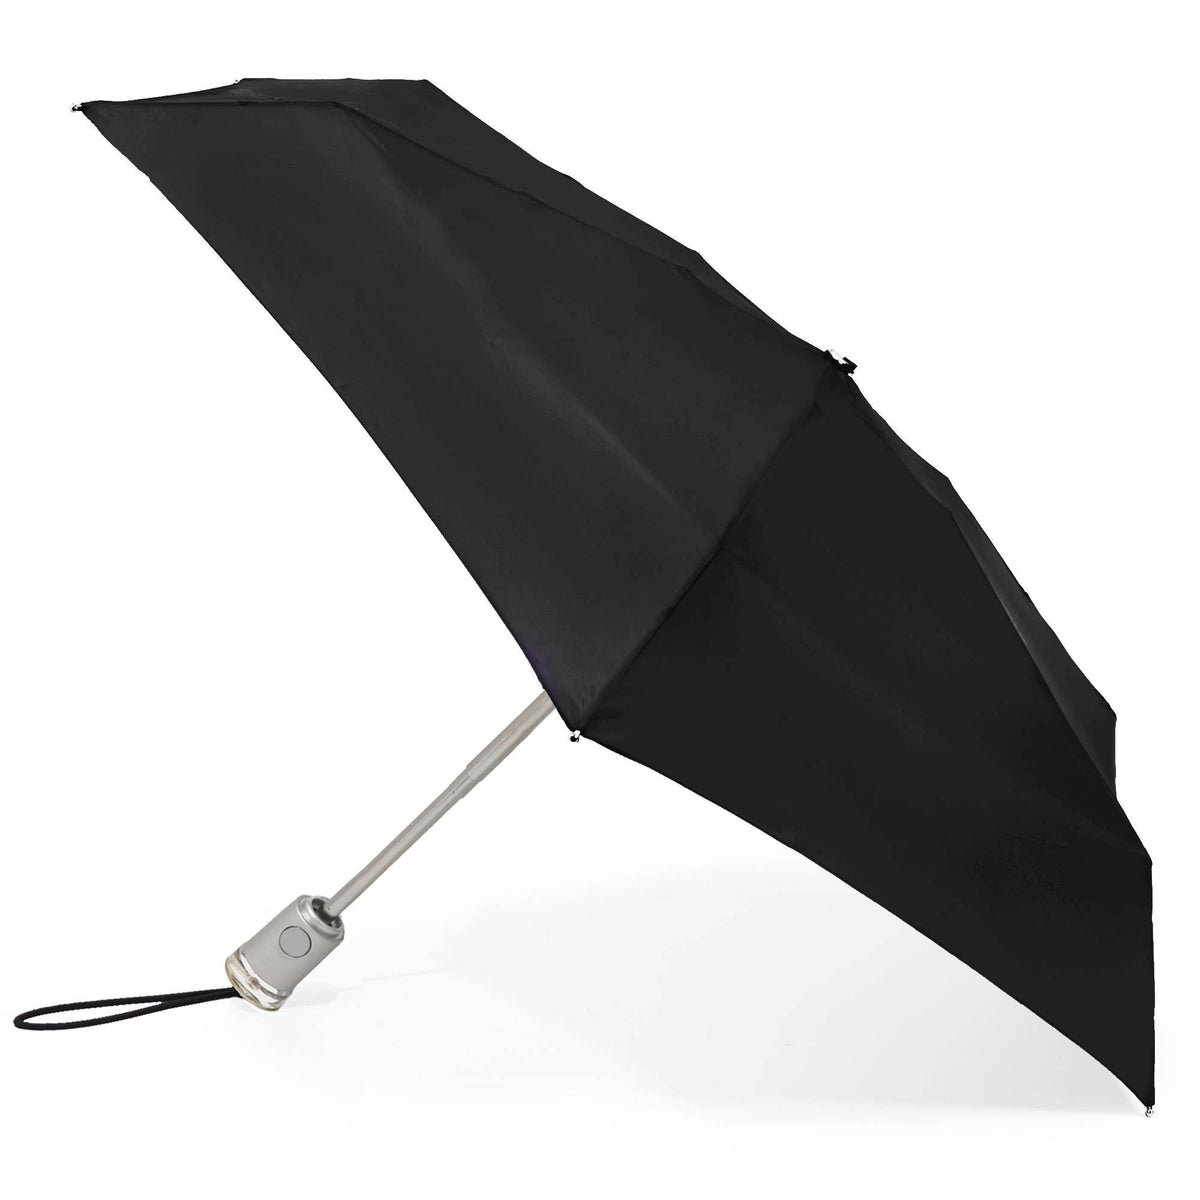 totes Automatic Classic Compact SunGuard and NeverWet Umbrella black side view open